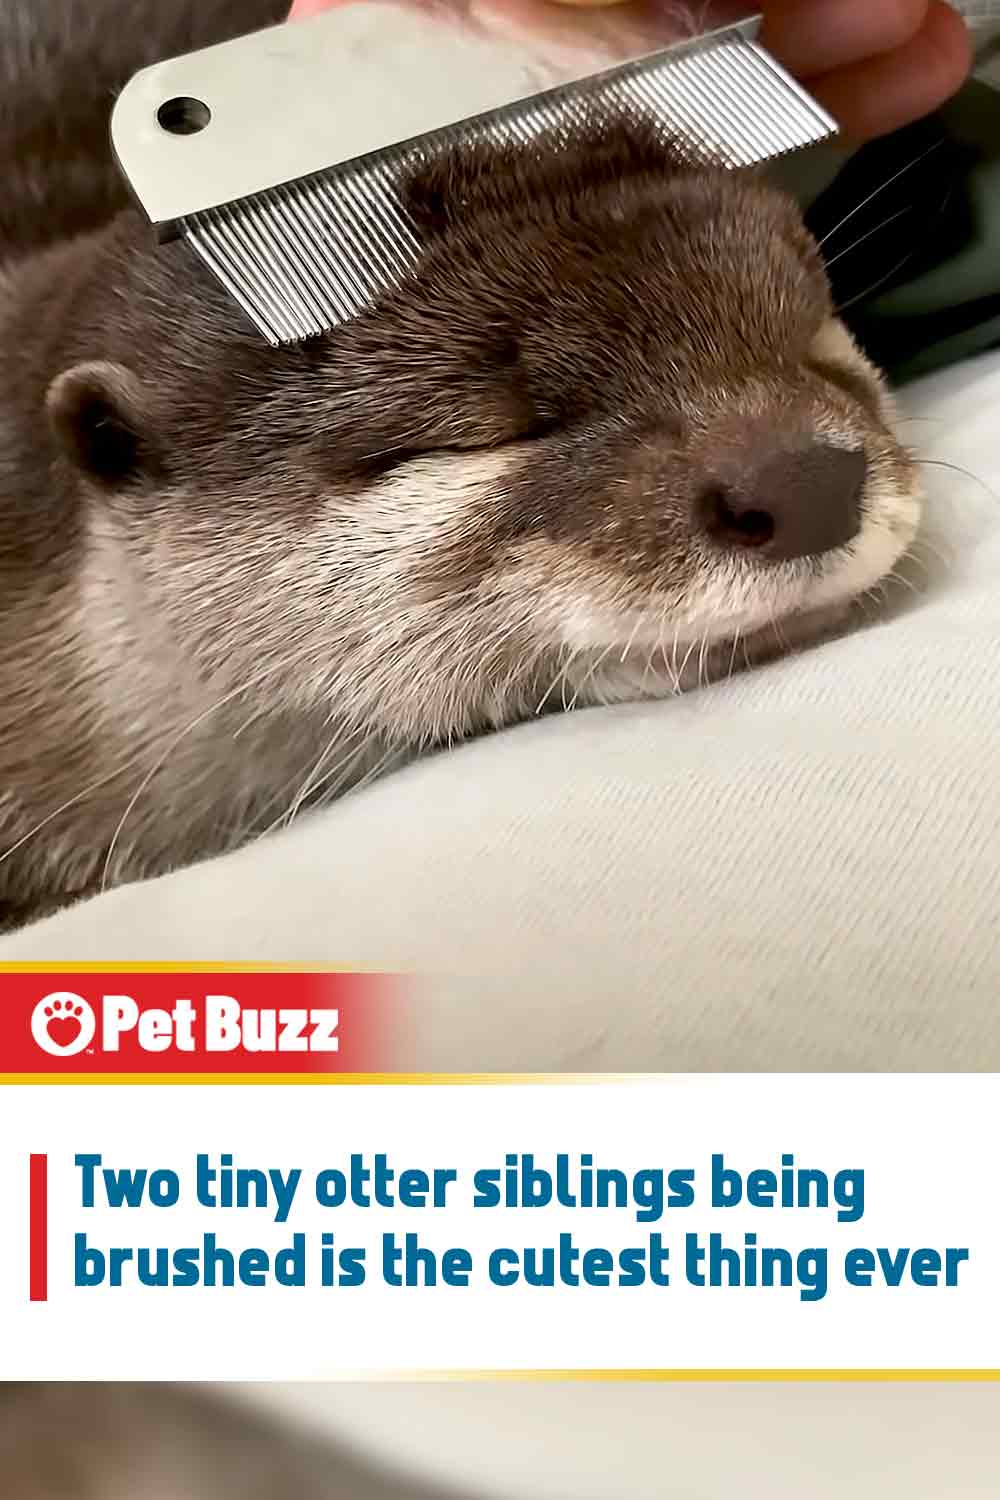 Two tiny otter siblings being brushed is the cutest thing ever